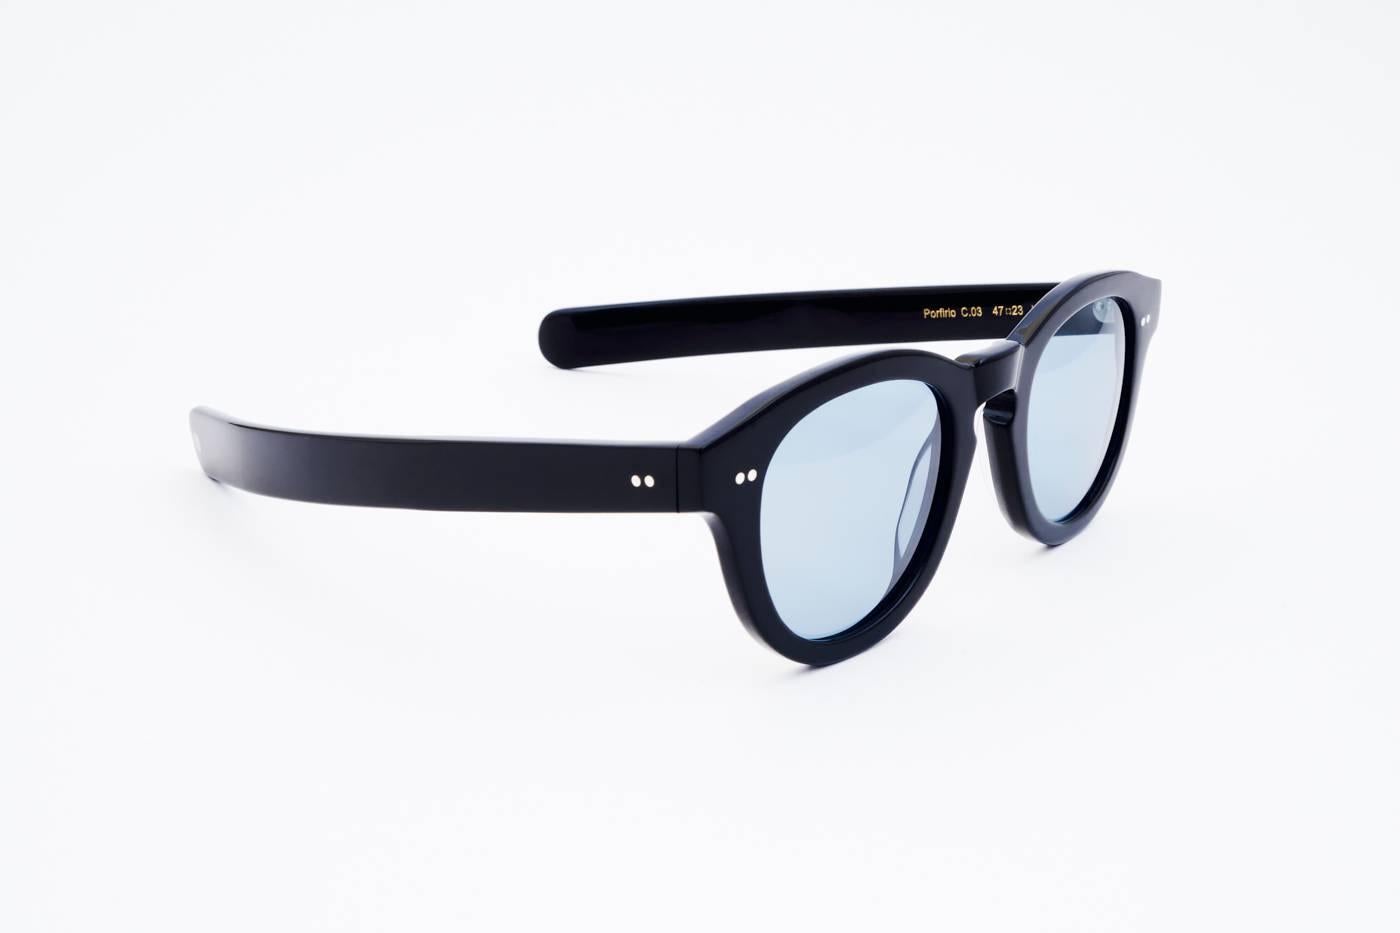 Porfirio eyewear style is named after the famous 1950’s style icon, Porfirio Rubirosa. With its chic 70’s silhouette and thick glossy acetate, the Porfirio is the perfect combination of bold style and subtle sex-appeal, in which contemporary glamour